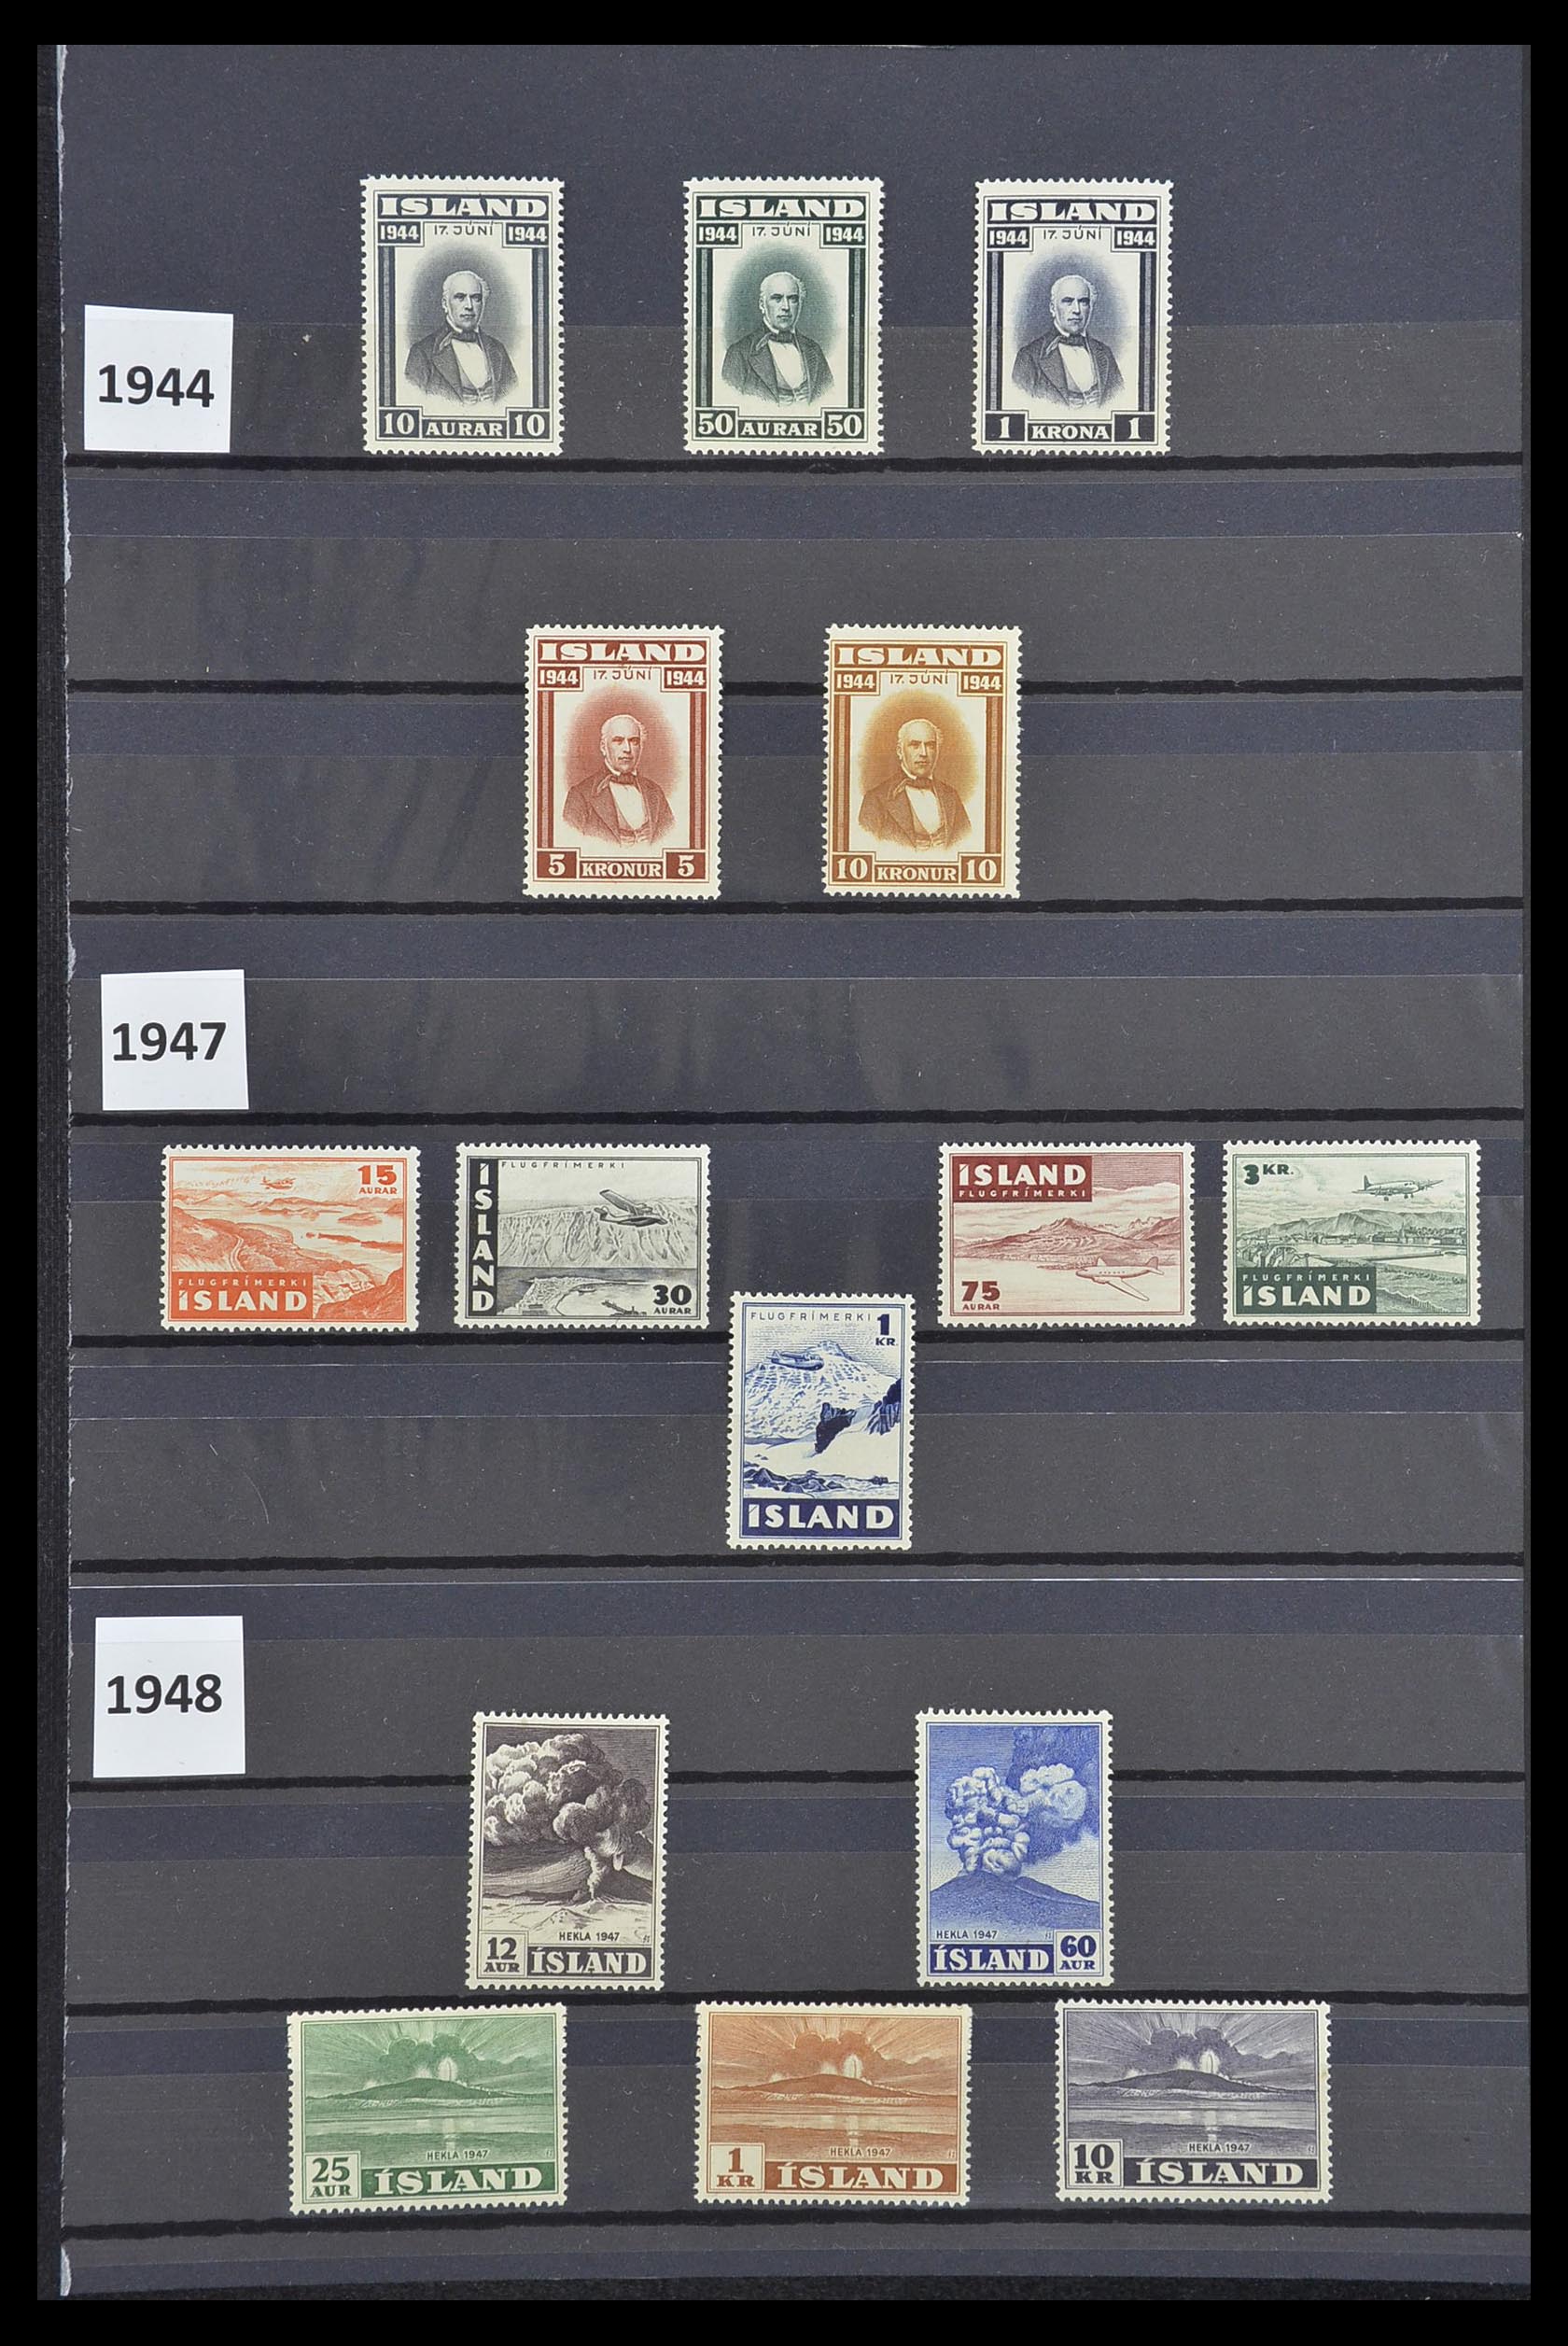 33726 086 - Stamp collection 33726 Scandinavia up to 2006.